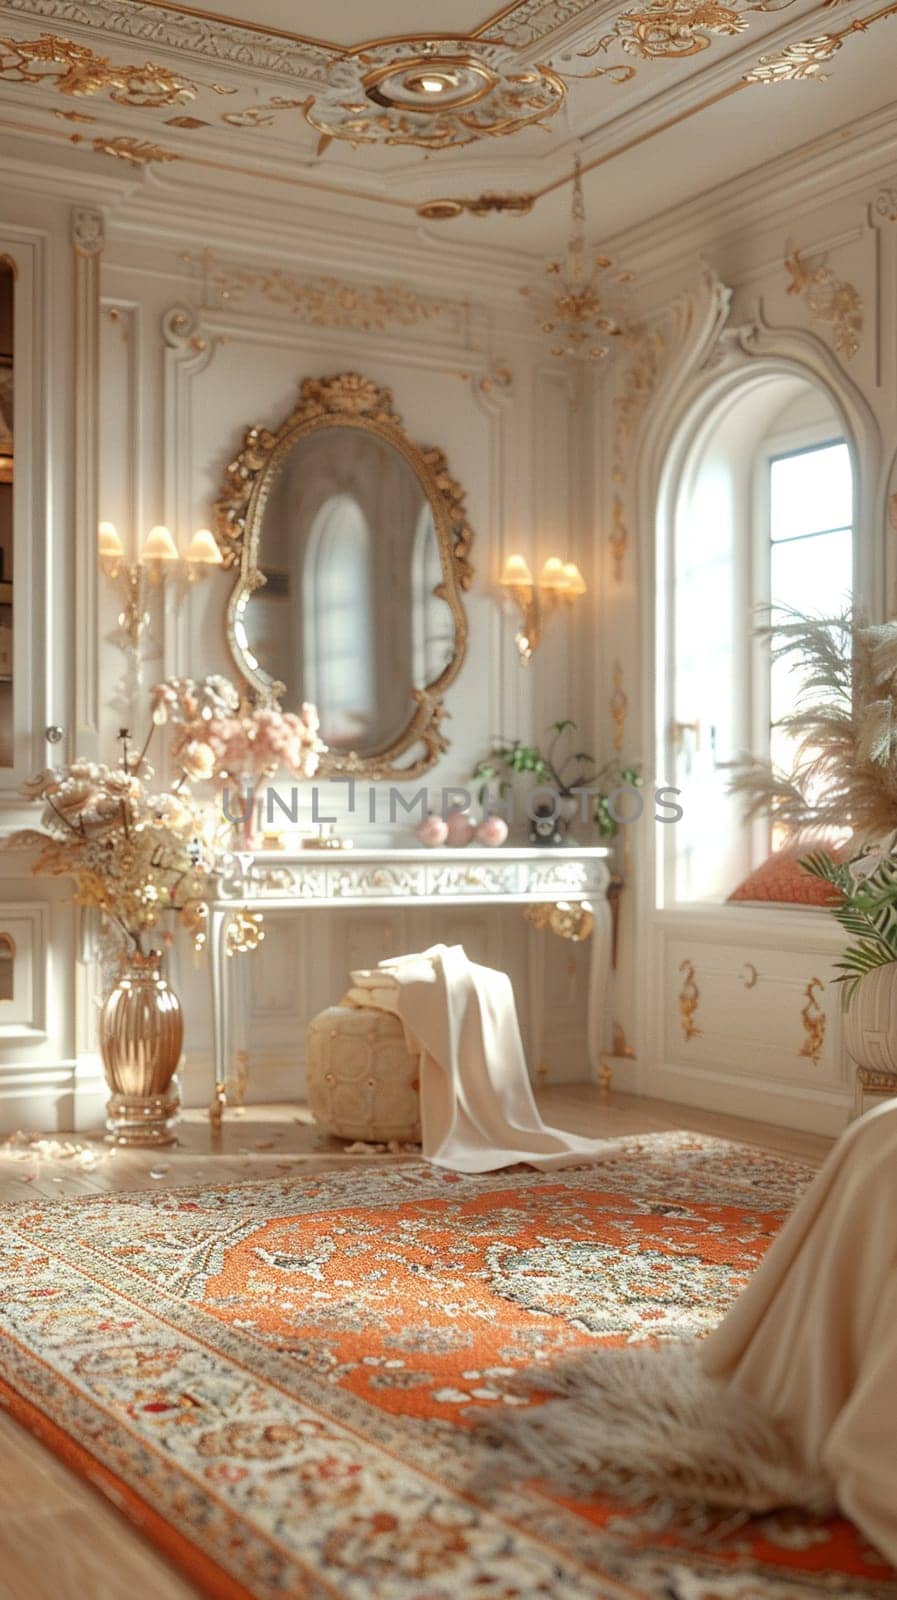 Luxurious dressing room with silk robes and a makeup vanity3D render.